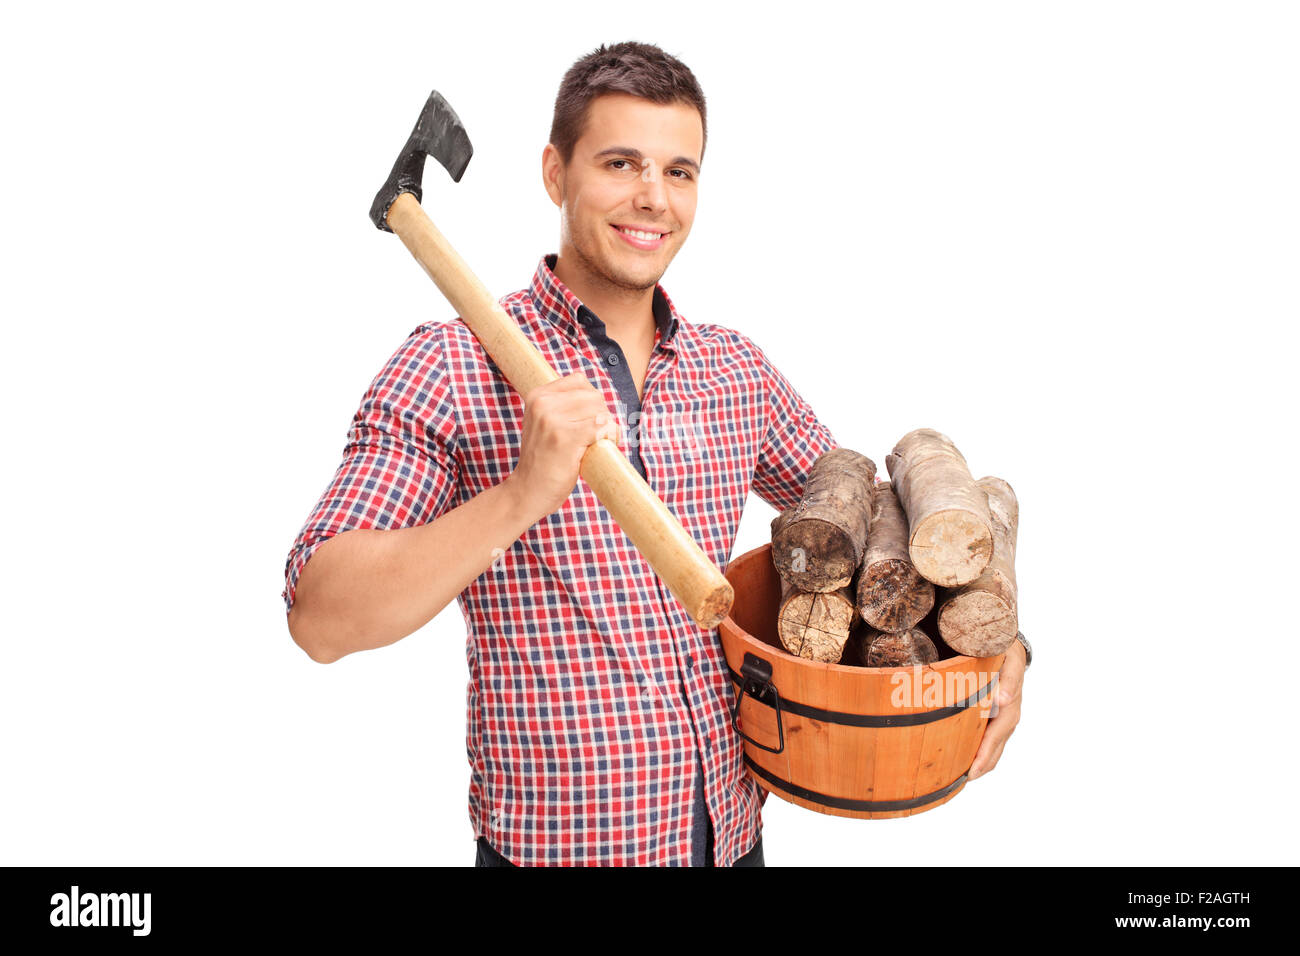 Young man carrying an ax over his shoulder and holding a bucket full of logs isolated on white background Stock Photo